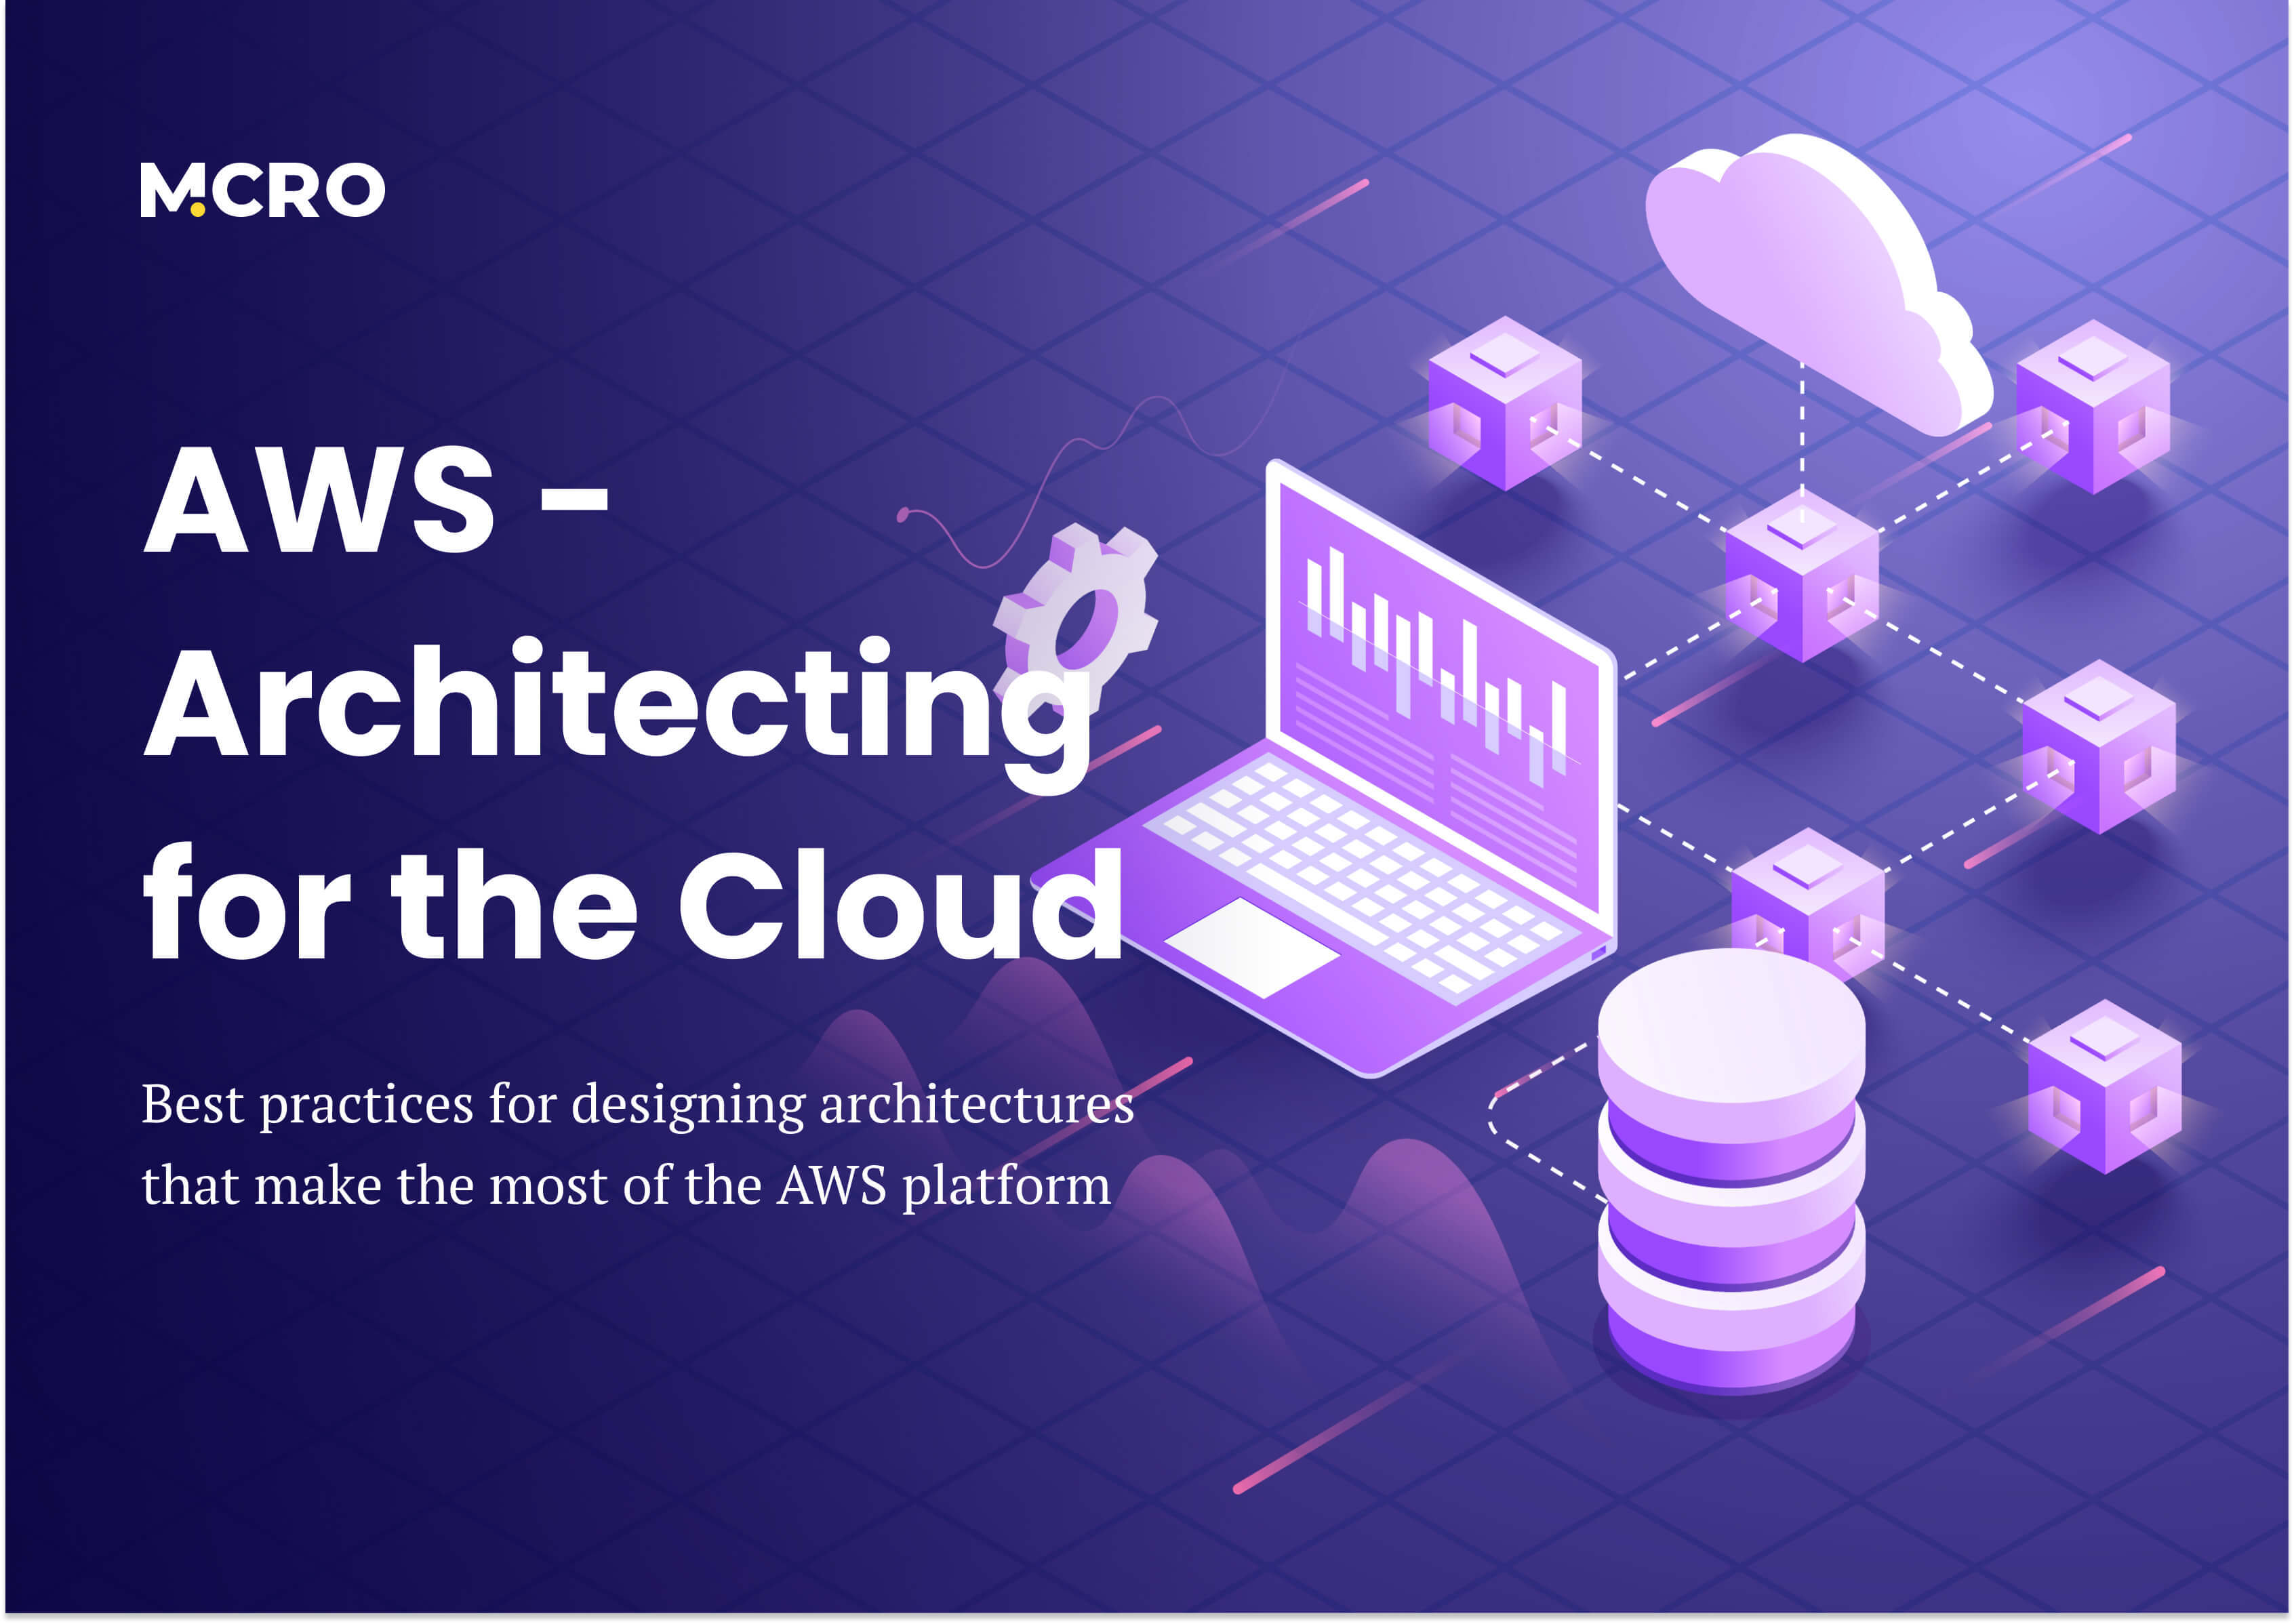 AWS - Architecting for the Cloud